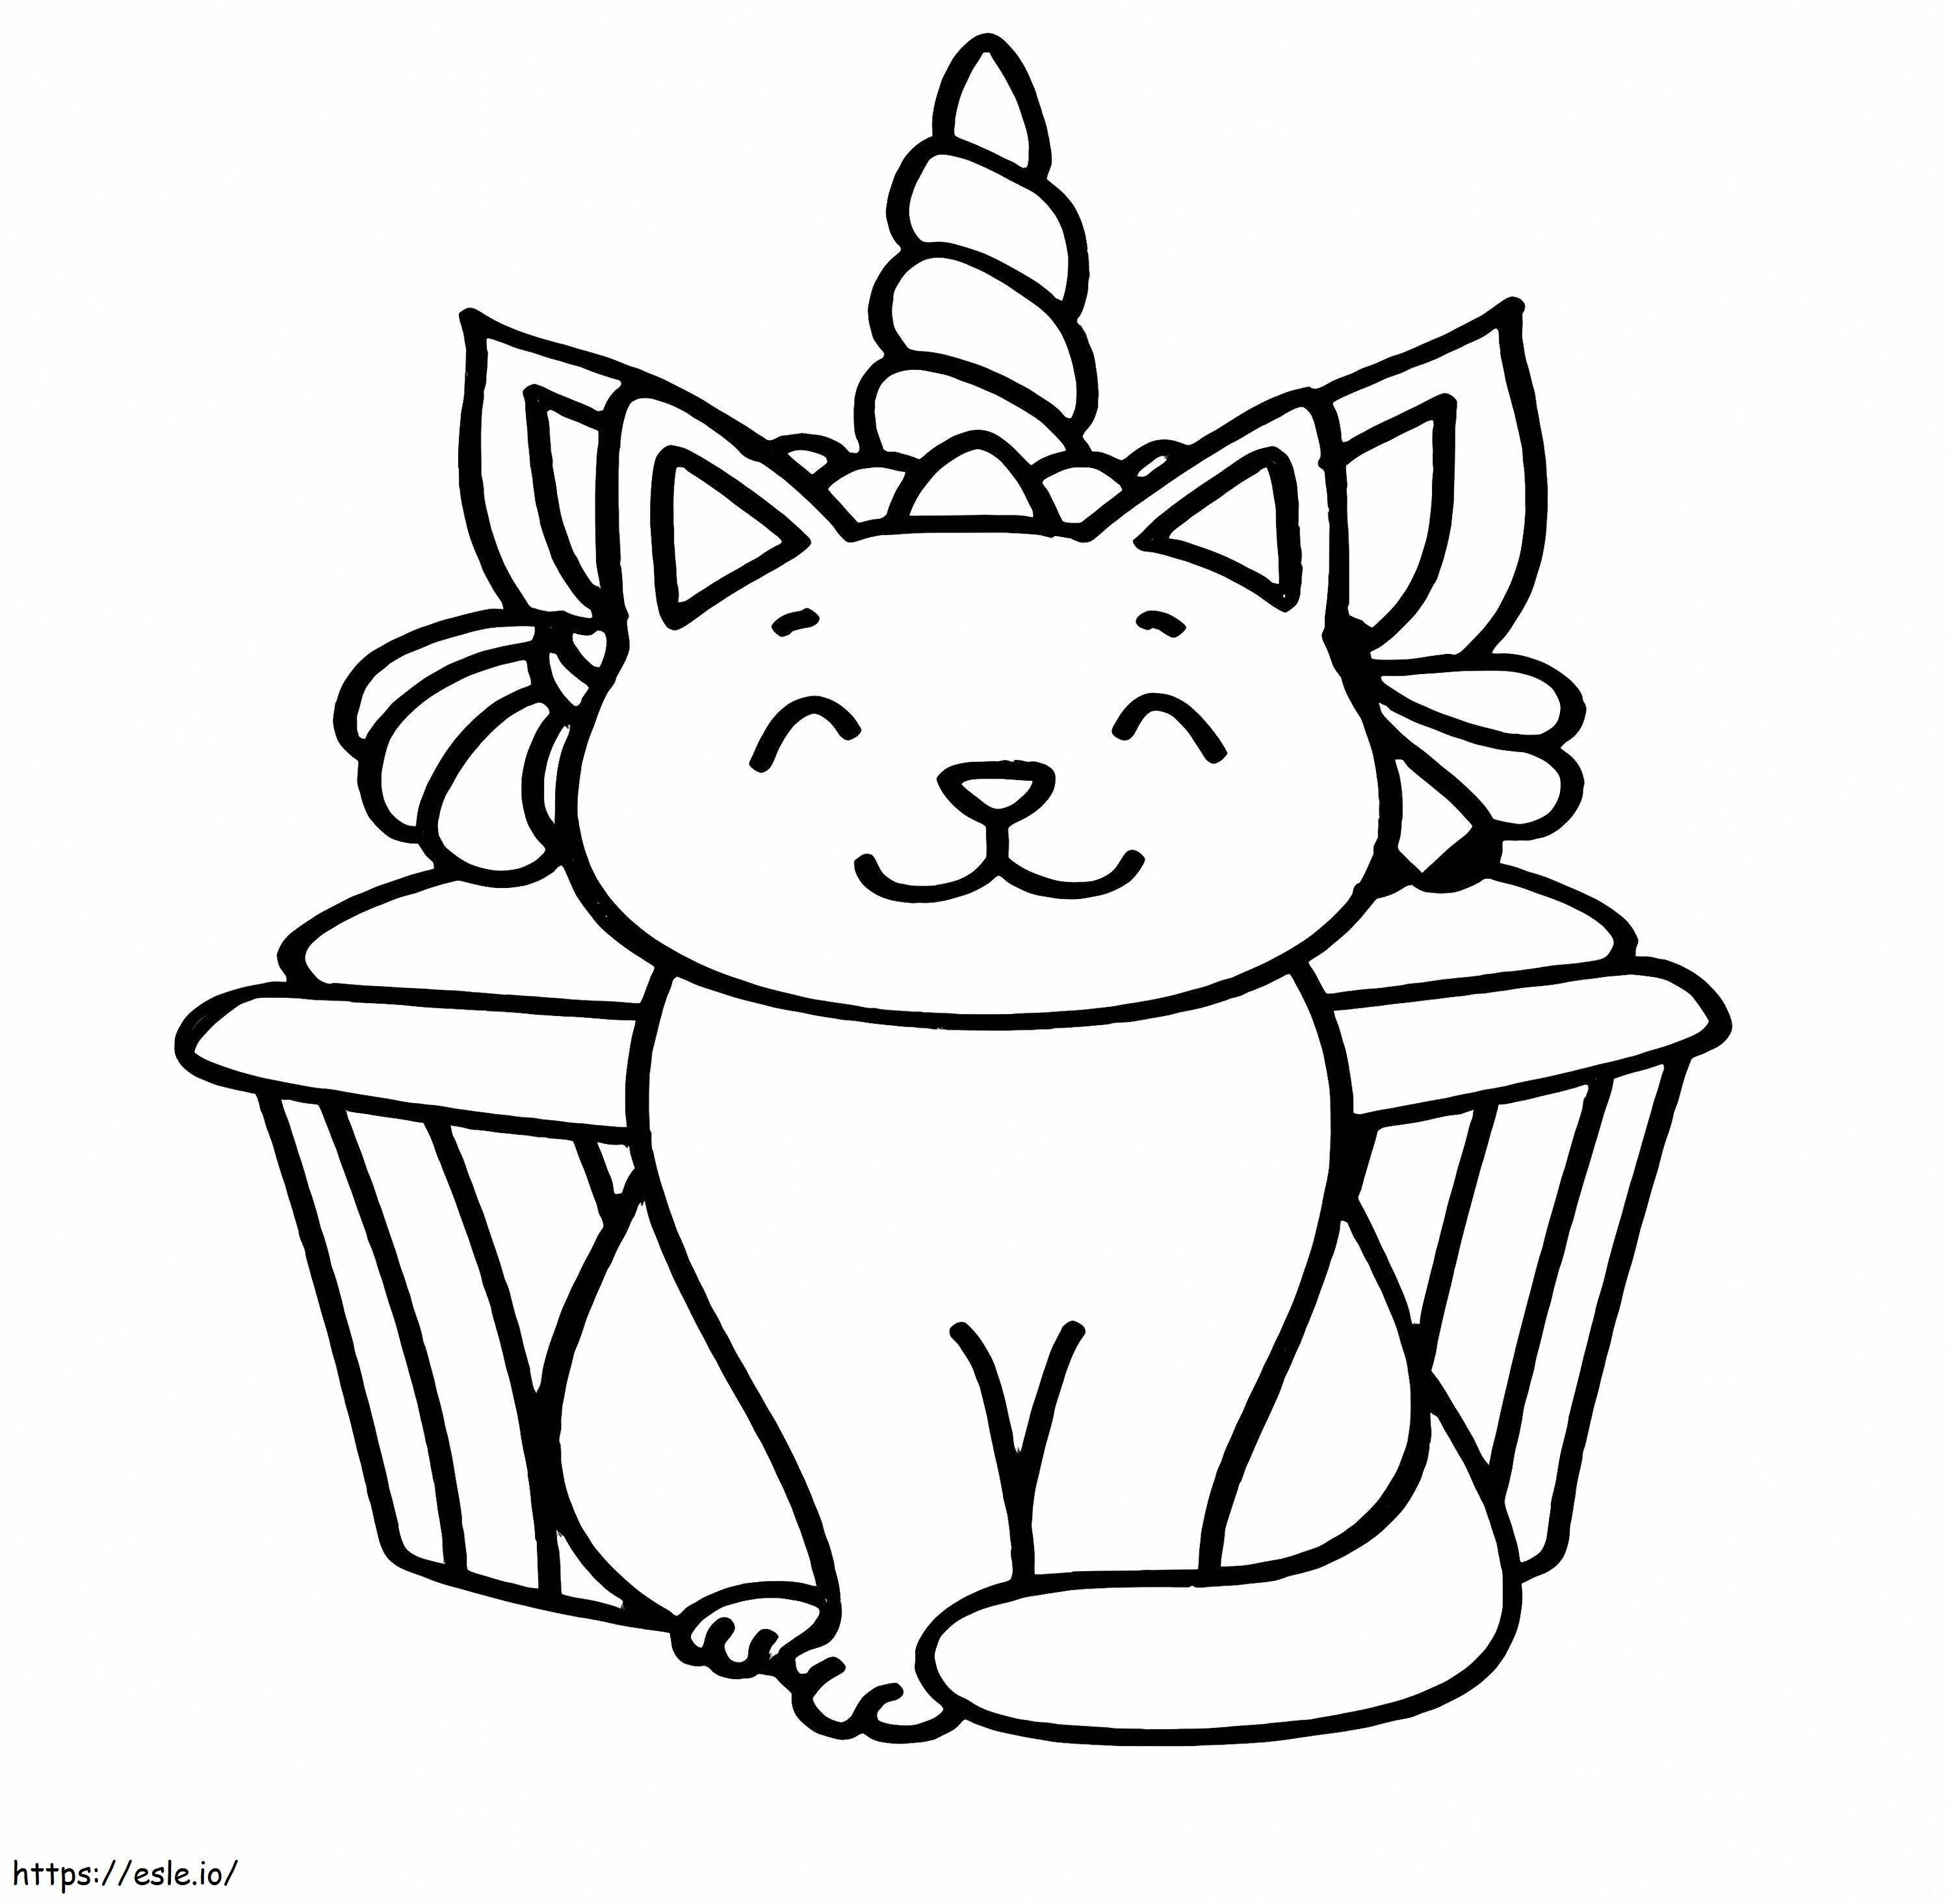 Unicorn Cat And Cupcake coloring page